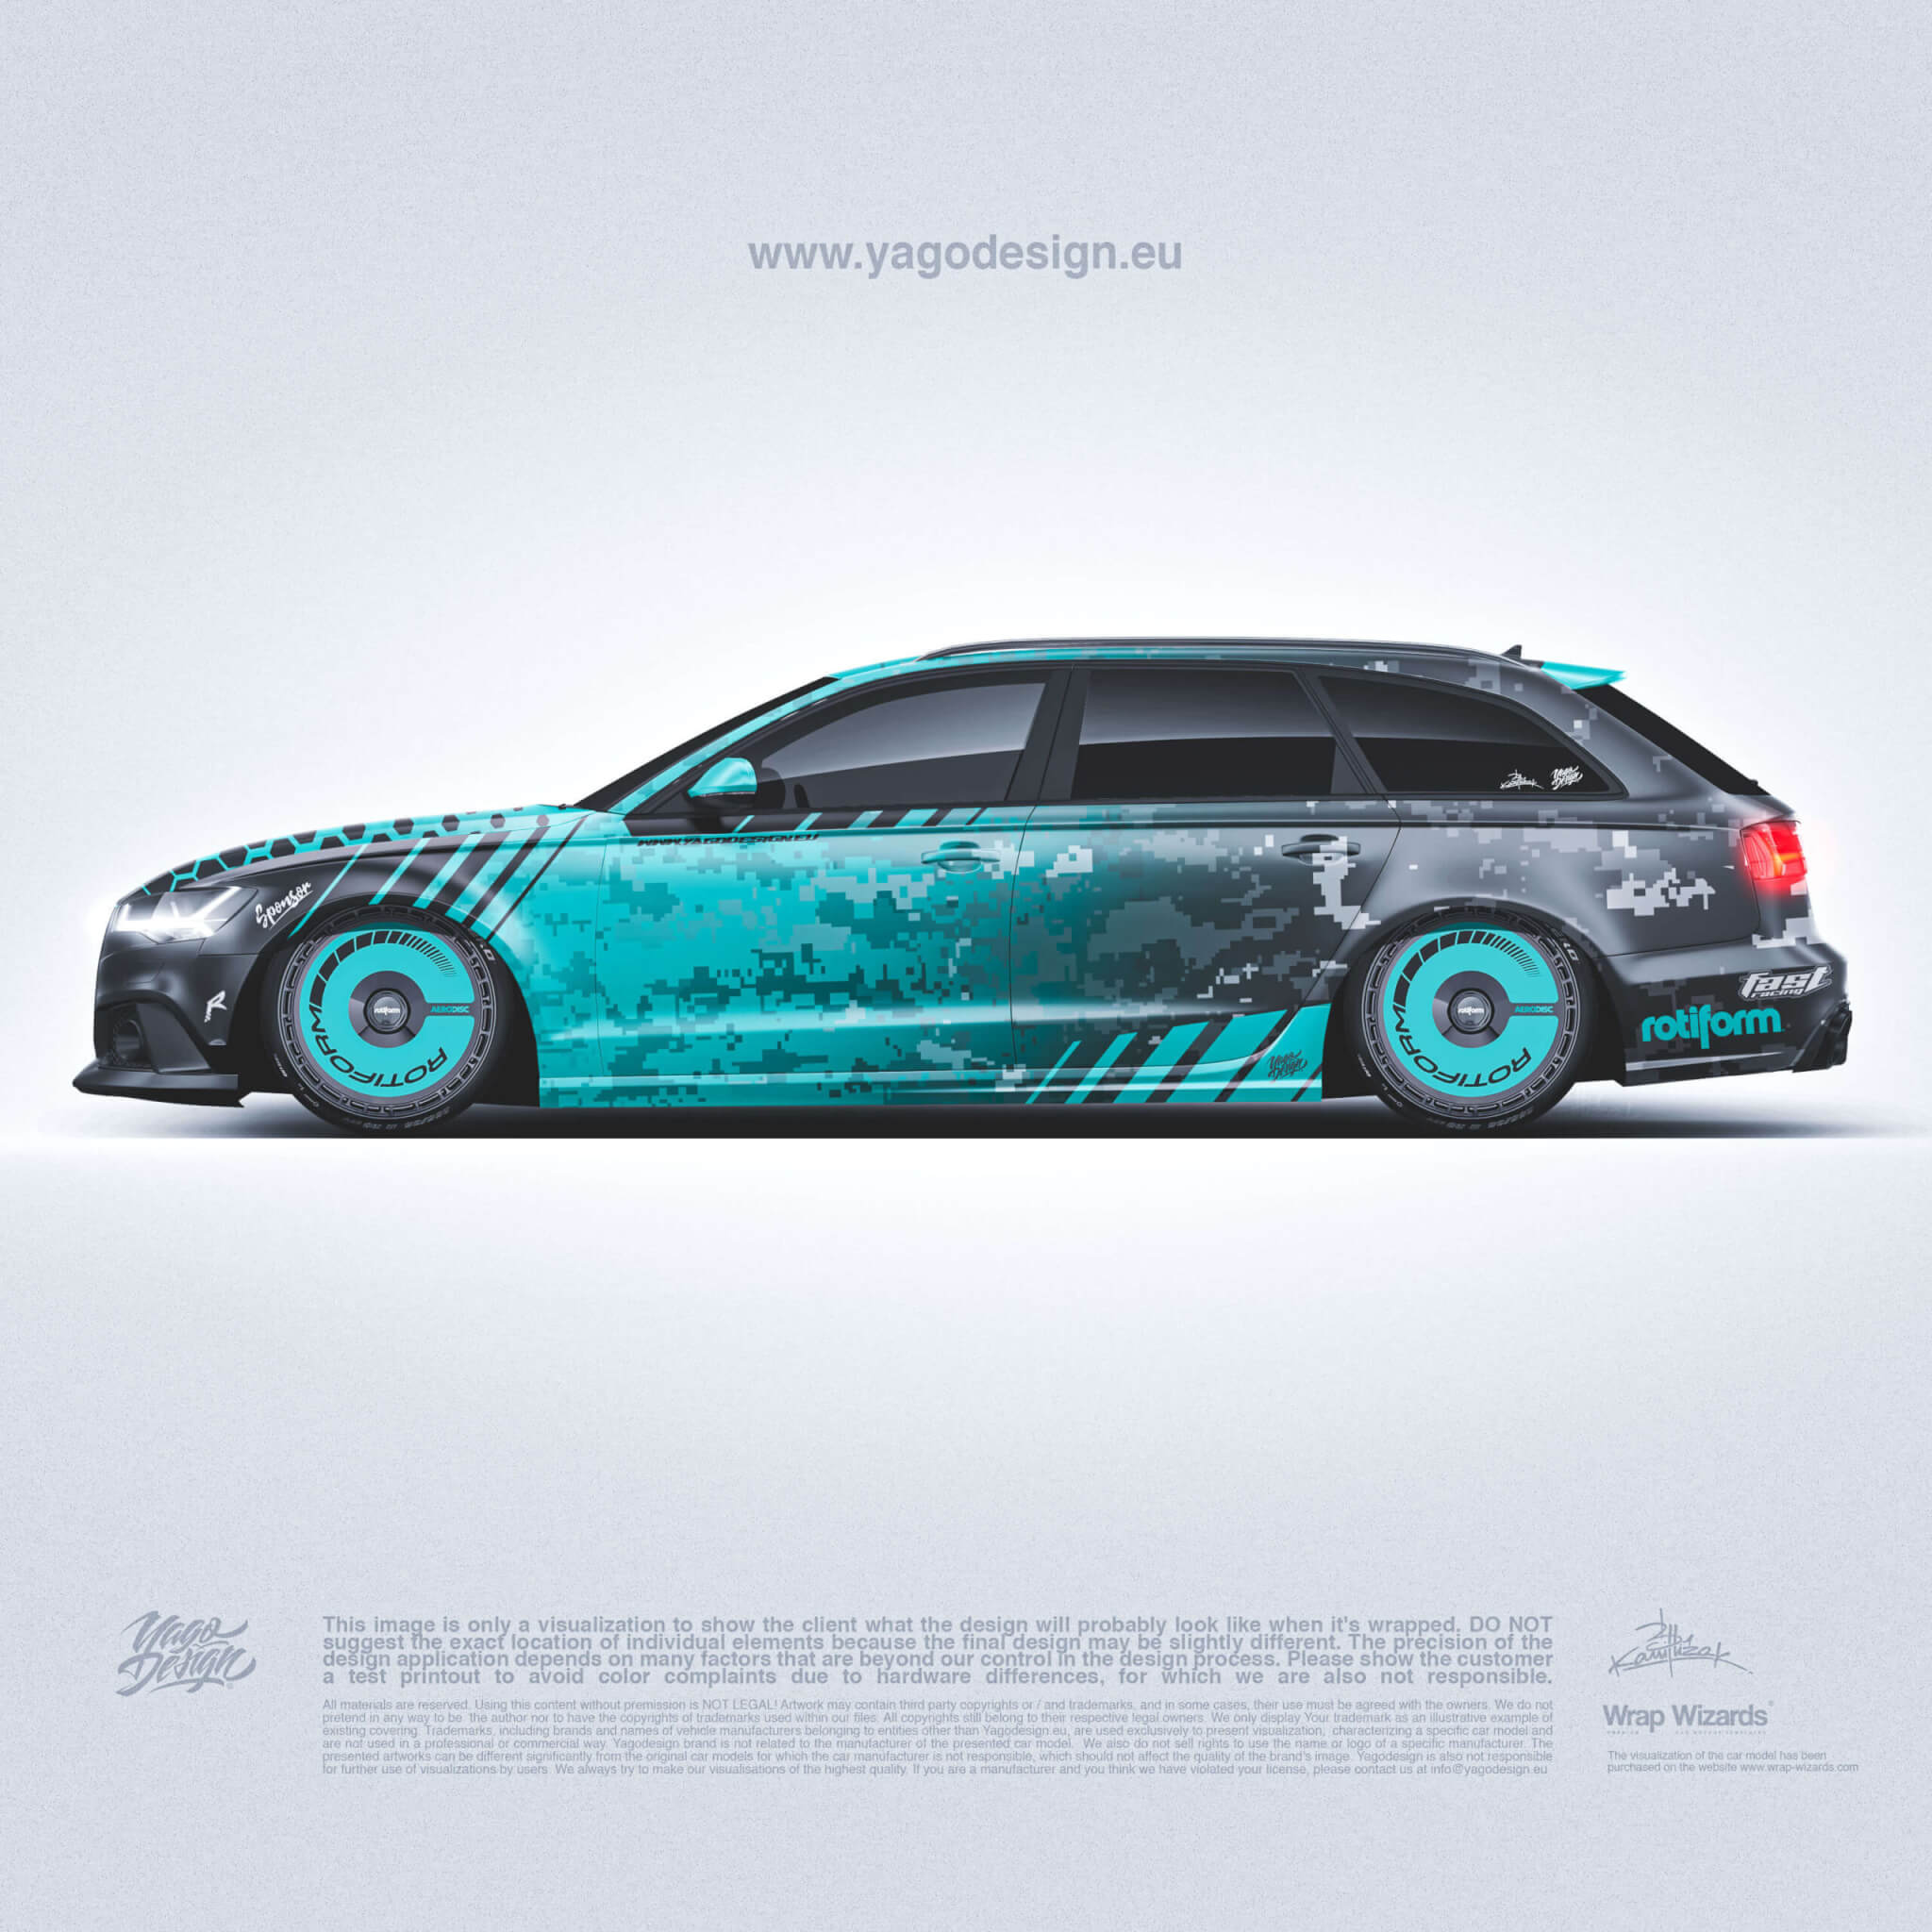 AUDI-RS6-DESIGN-BY-YAGODESIGNPX